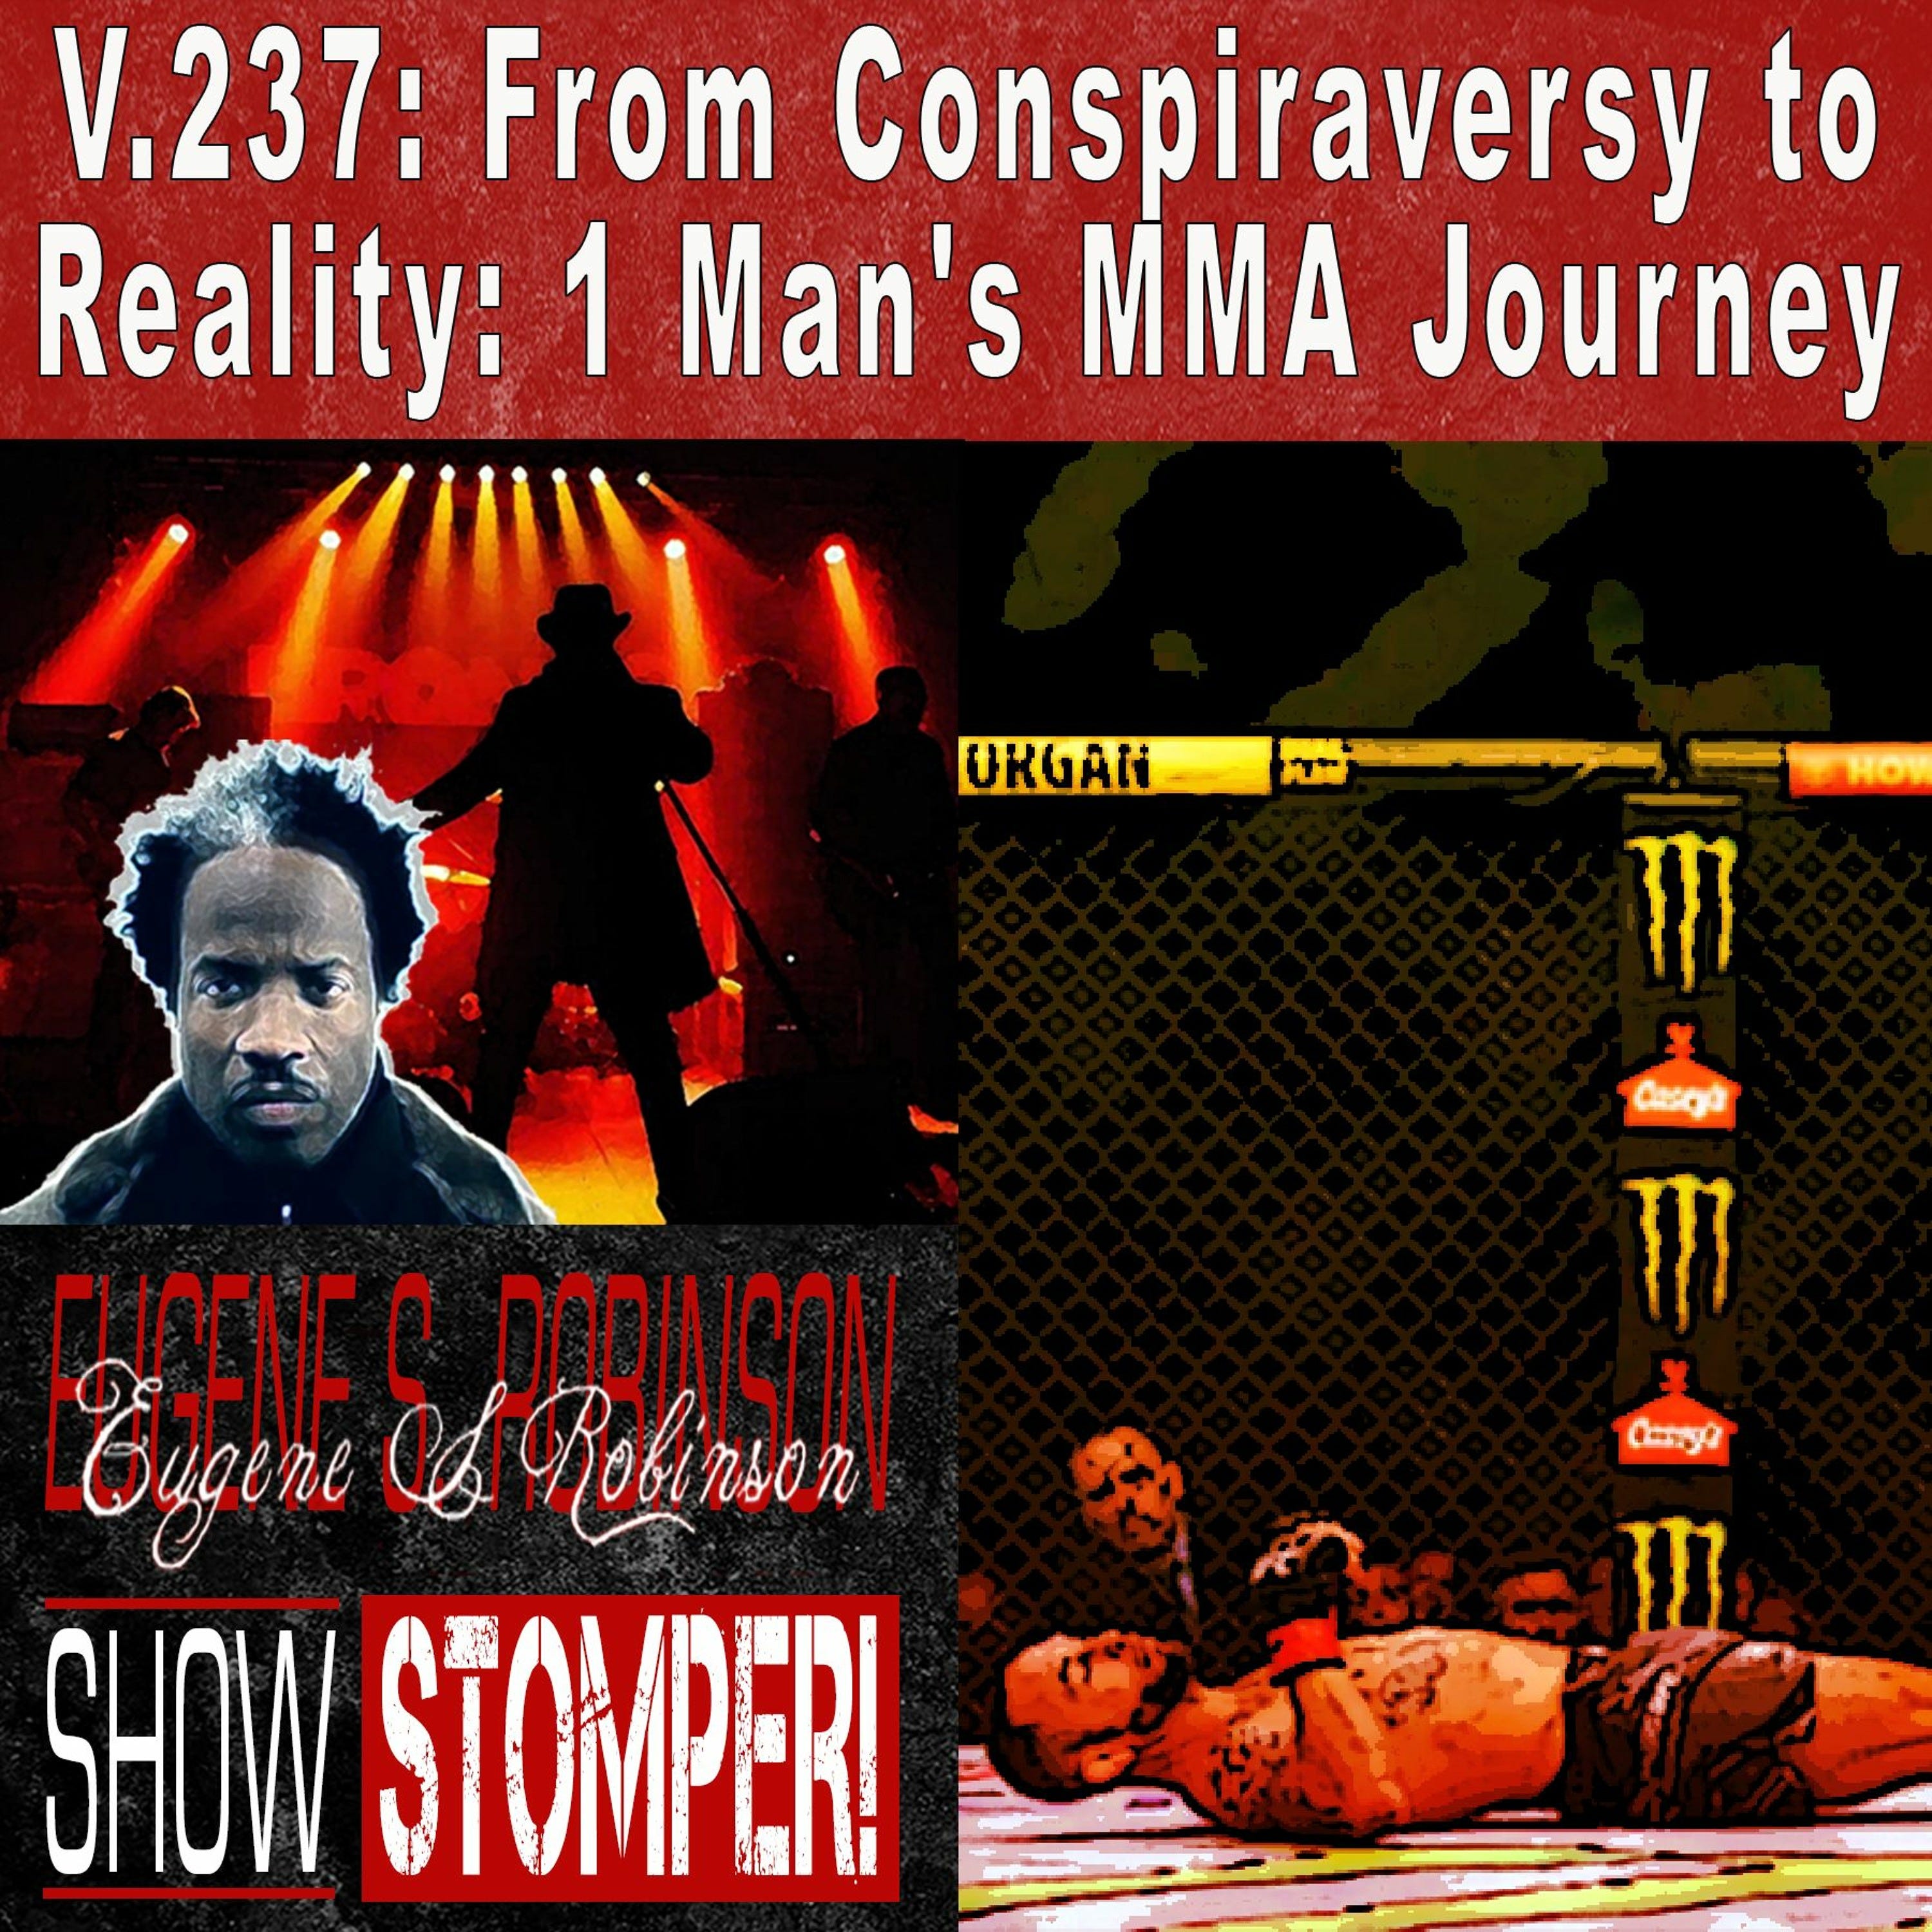 V.237: From Conspiraversy to Reality: 1 Man's MMA Journey On The Eugene S. Robinson Show Stomper!